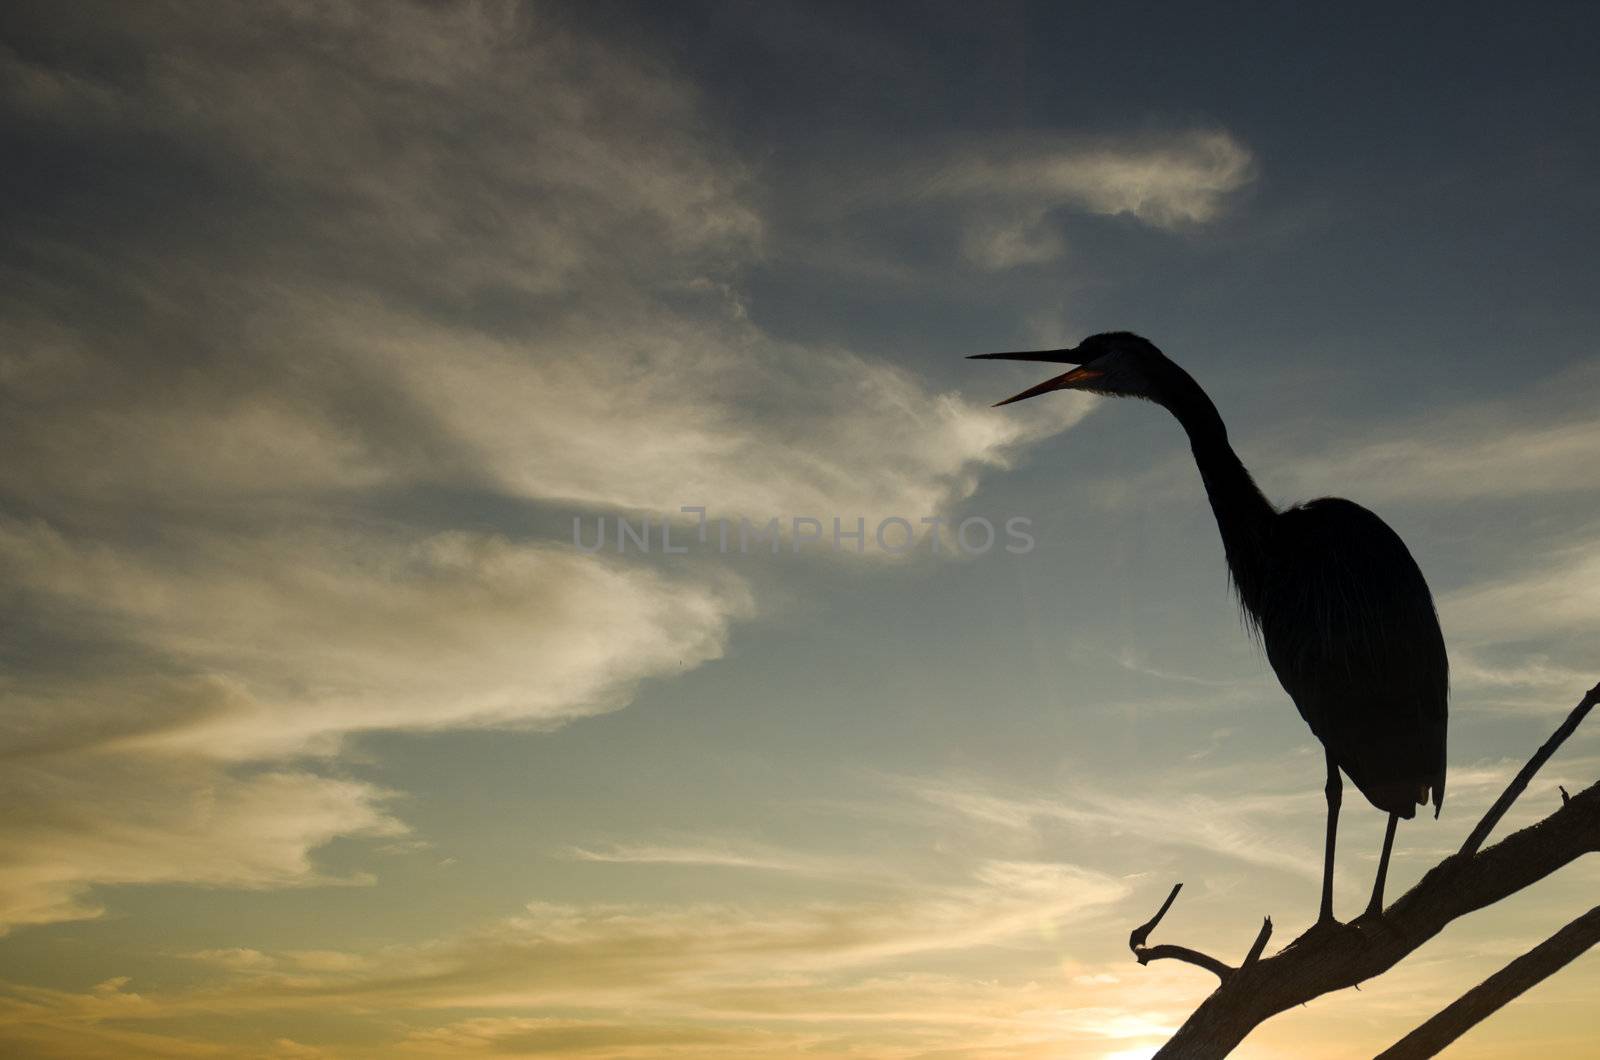 Silhouette of a heron standing on a branch calling out with bright sunset in the background